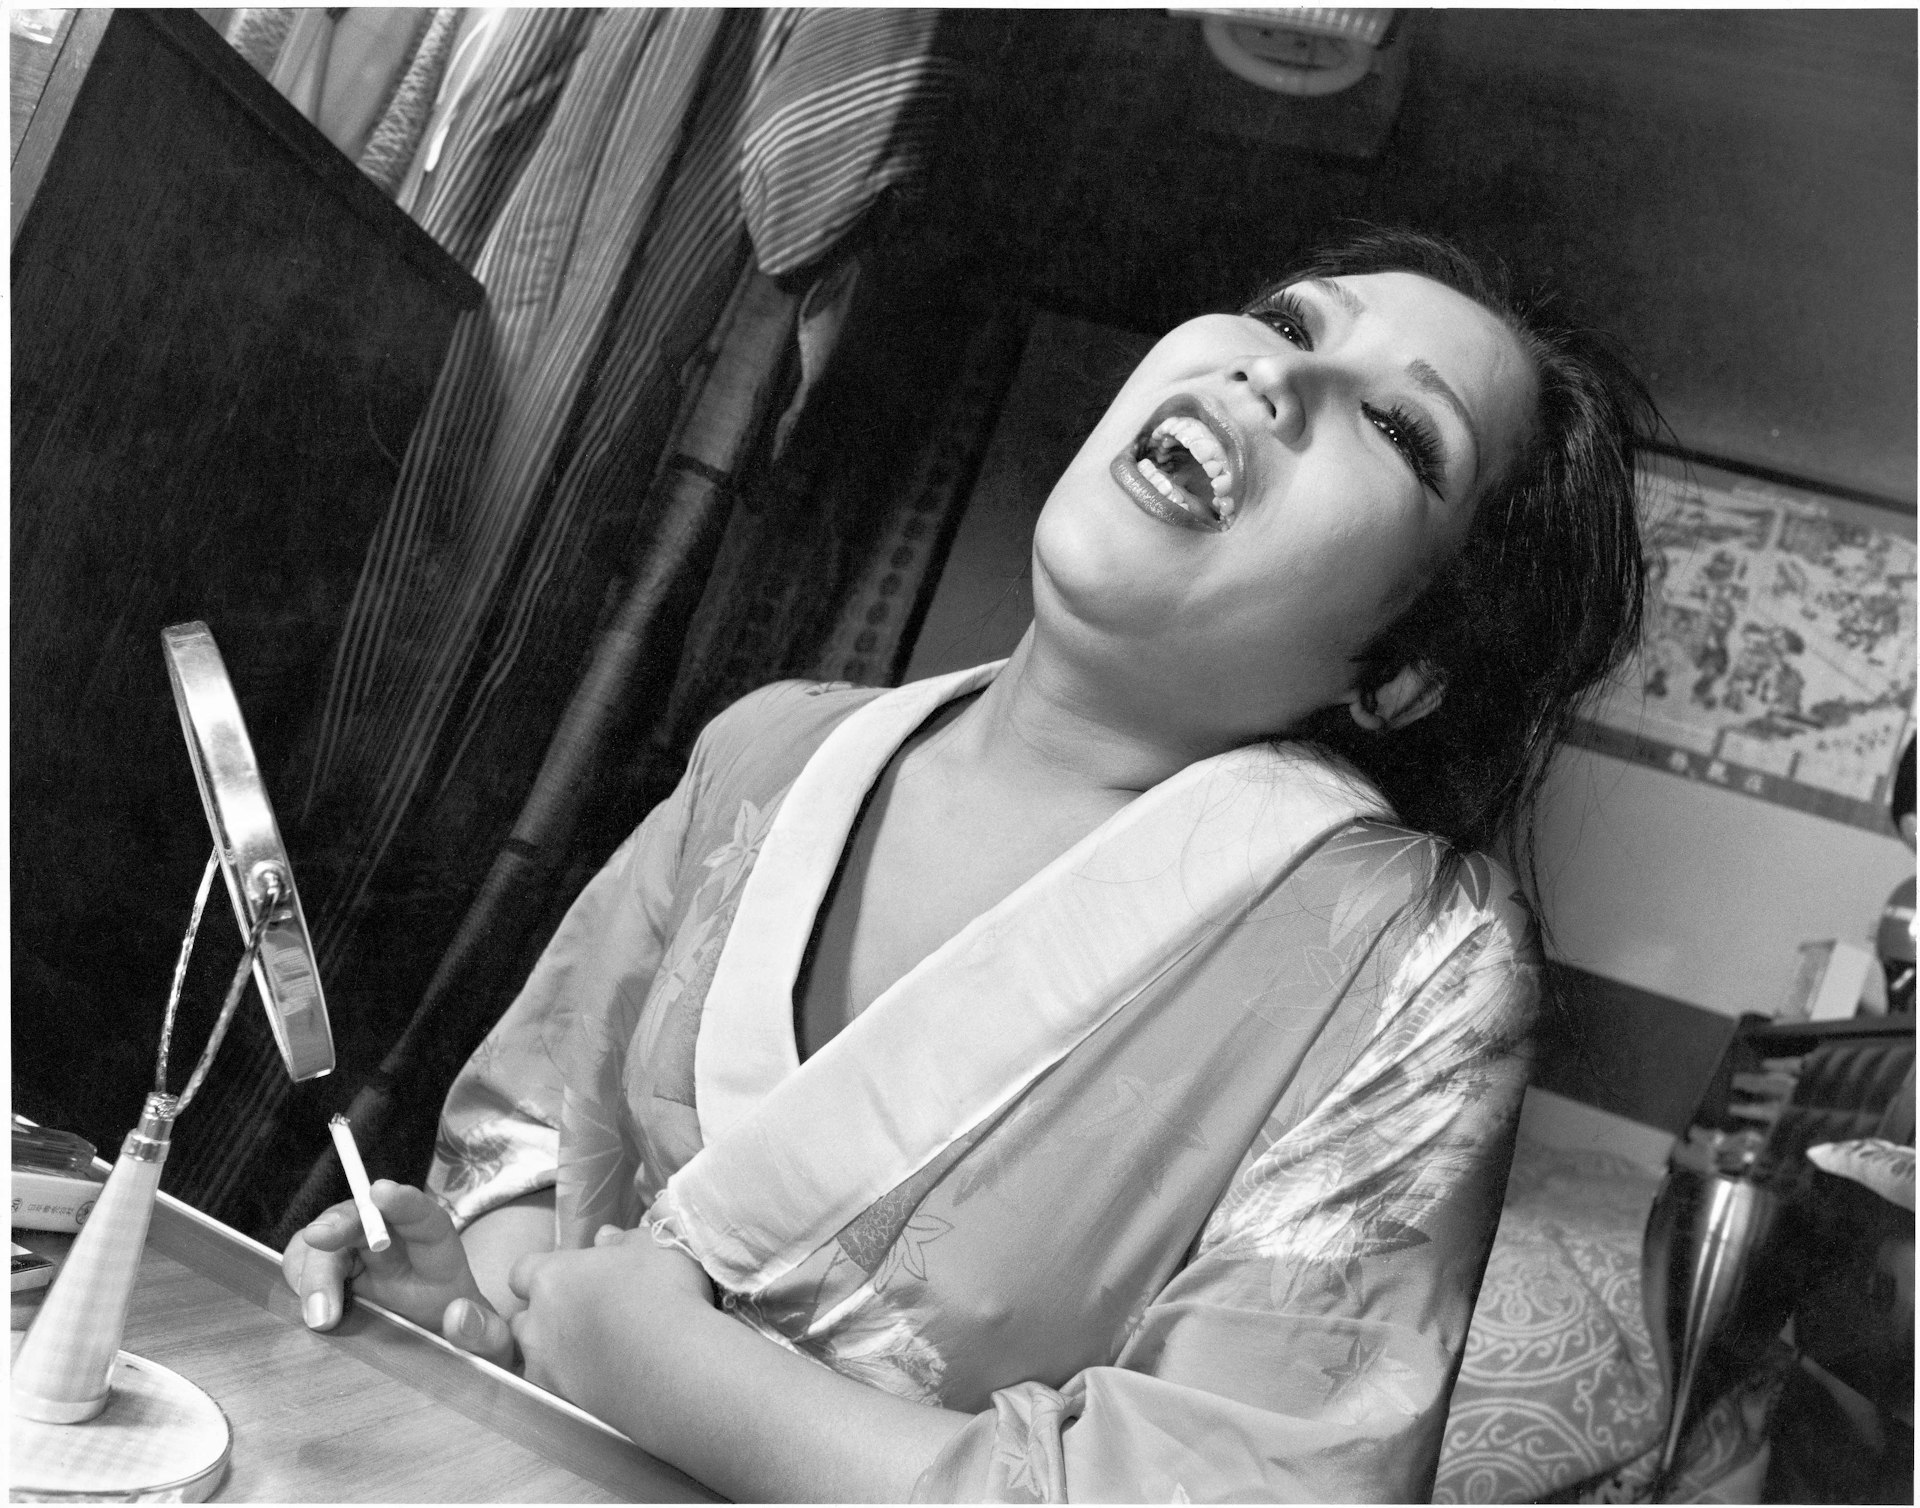 Sister Akane, at home, laughing. Ikebukuro, Honcho, 1977 From the series Flash Up, 1975 -1979 Collection of Mark Pearson, Zen Foto Gallery